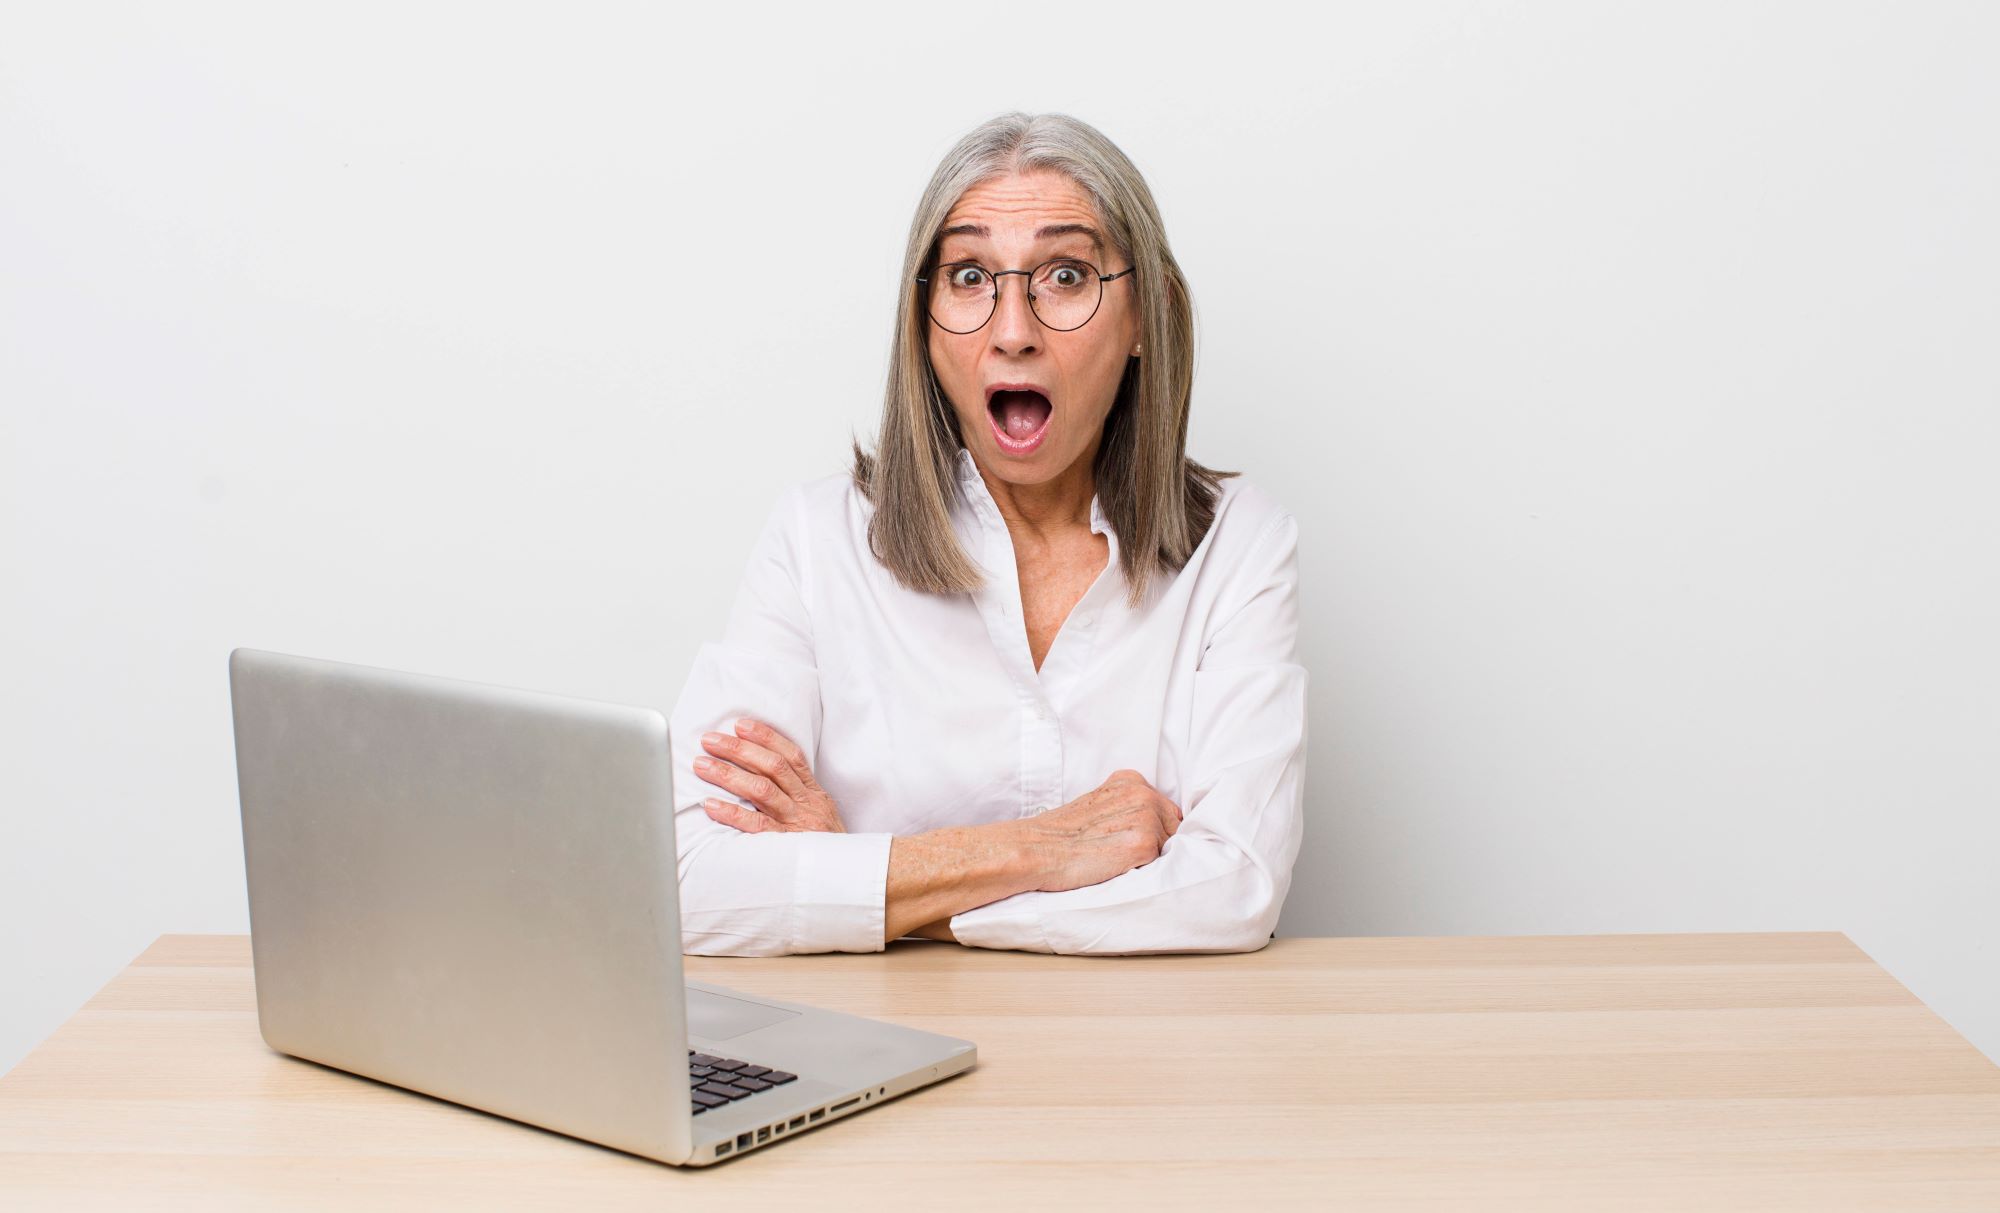 shocked 55+ woman sitting in front of an open computer